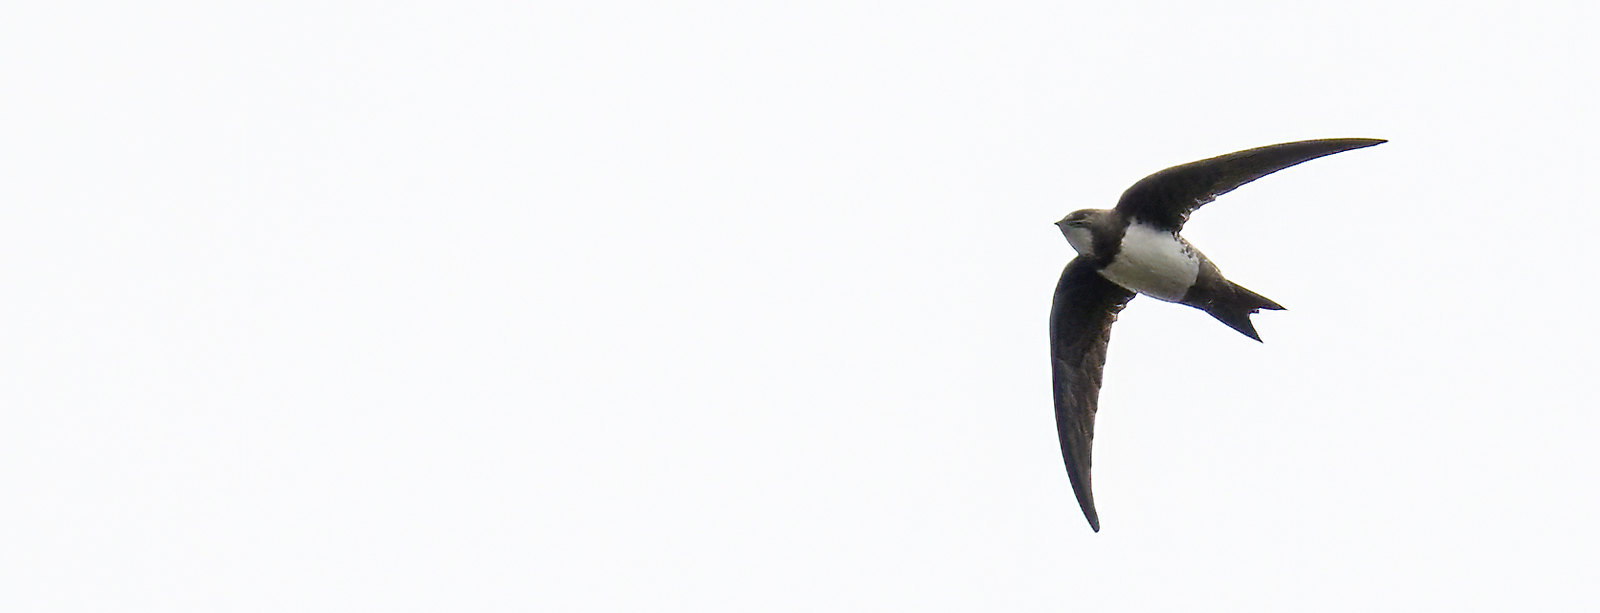 Alpine Swift - a dismal day and we should've gone to see the Chapel St. Leonard's birds - hey-ho :-(